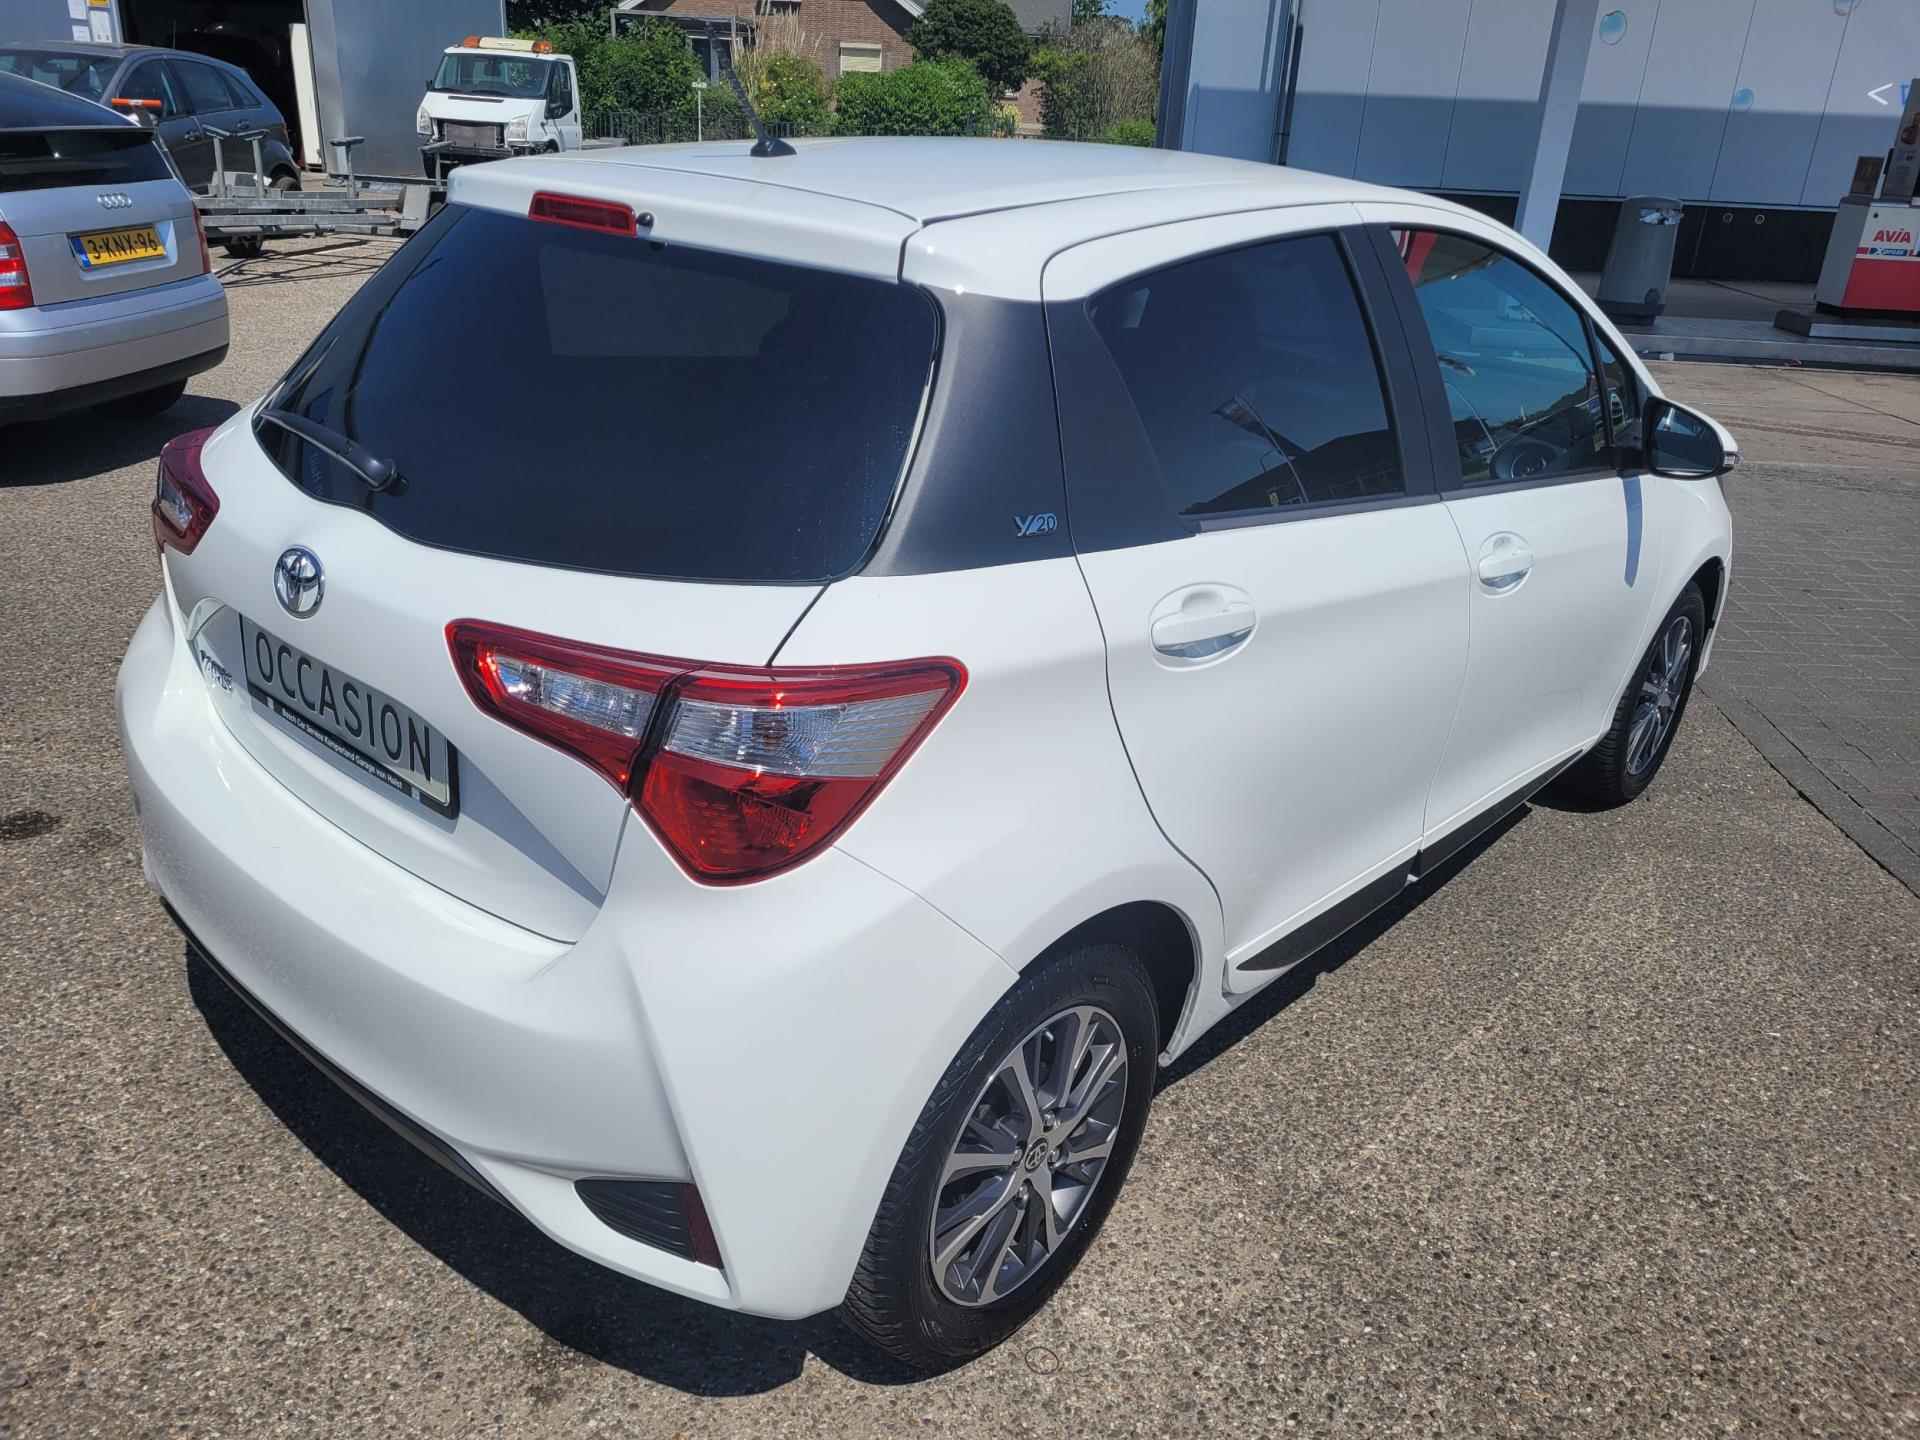 Toyota Yaris 1.5 VVT-i Dynamic Y20 AUTOMAAT / APPLE+ANDROID CAR PLAY / BTW Auto - 7/30